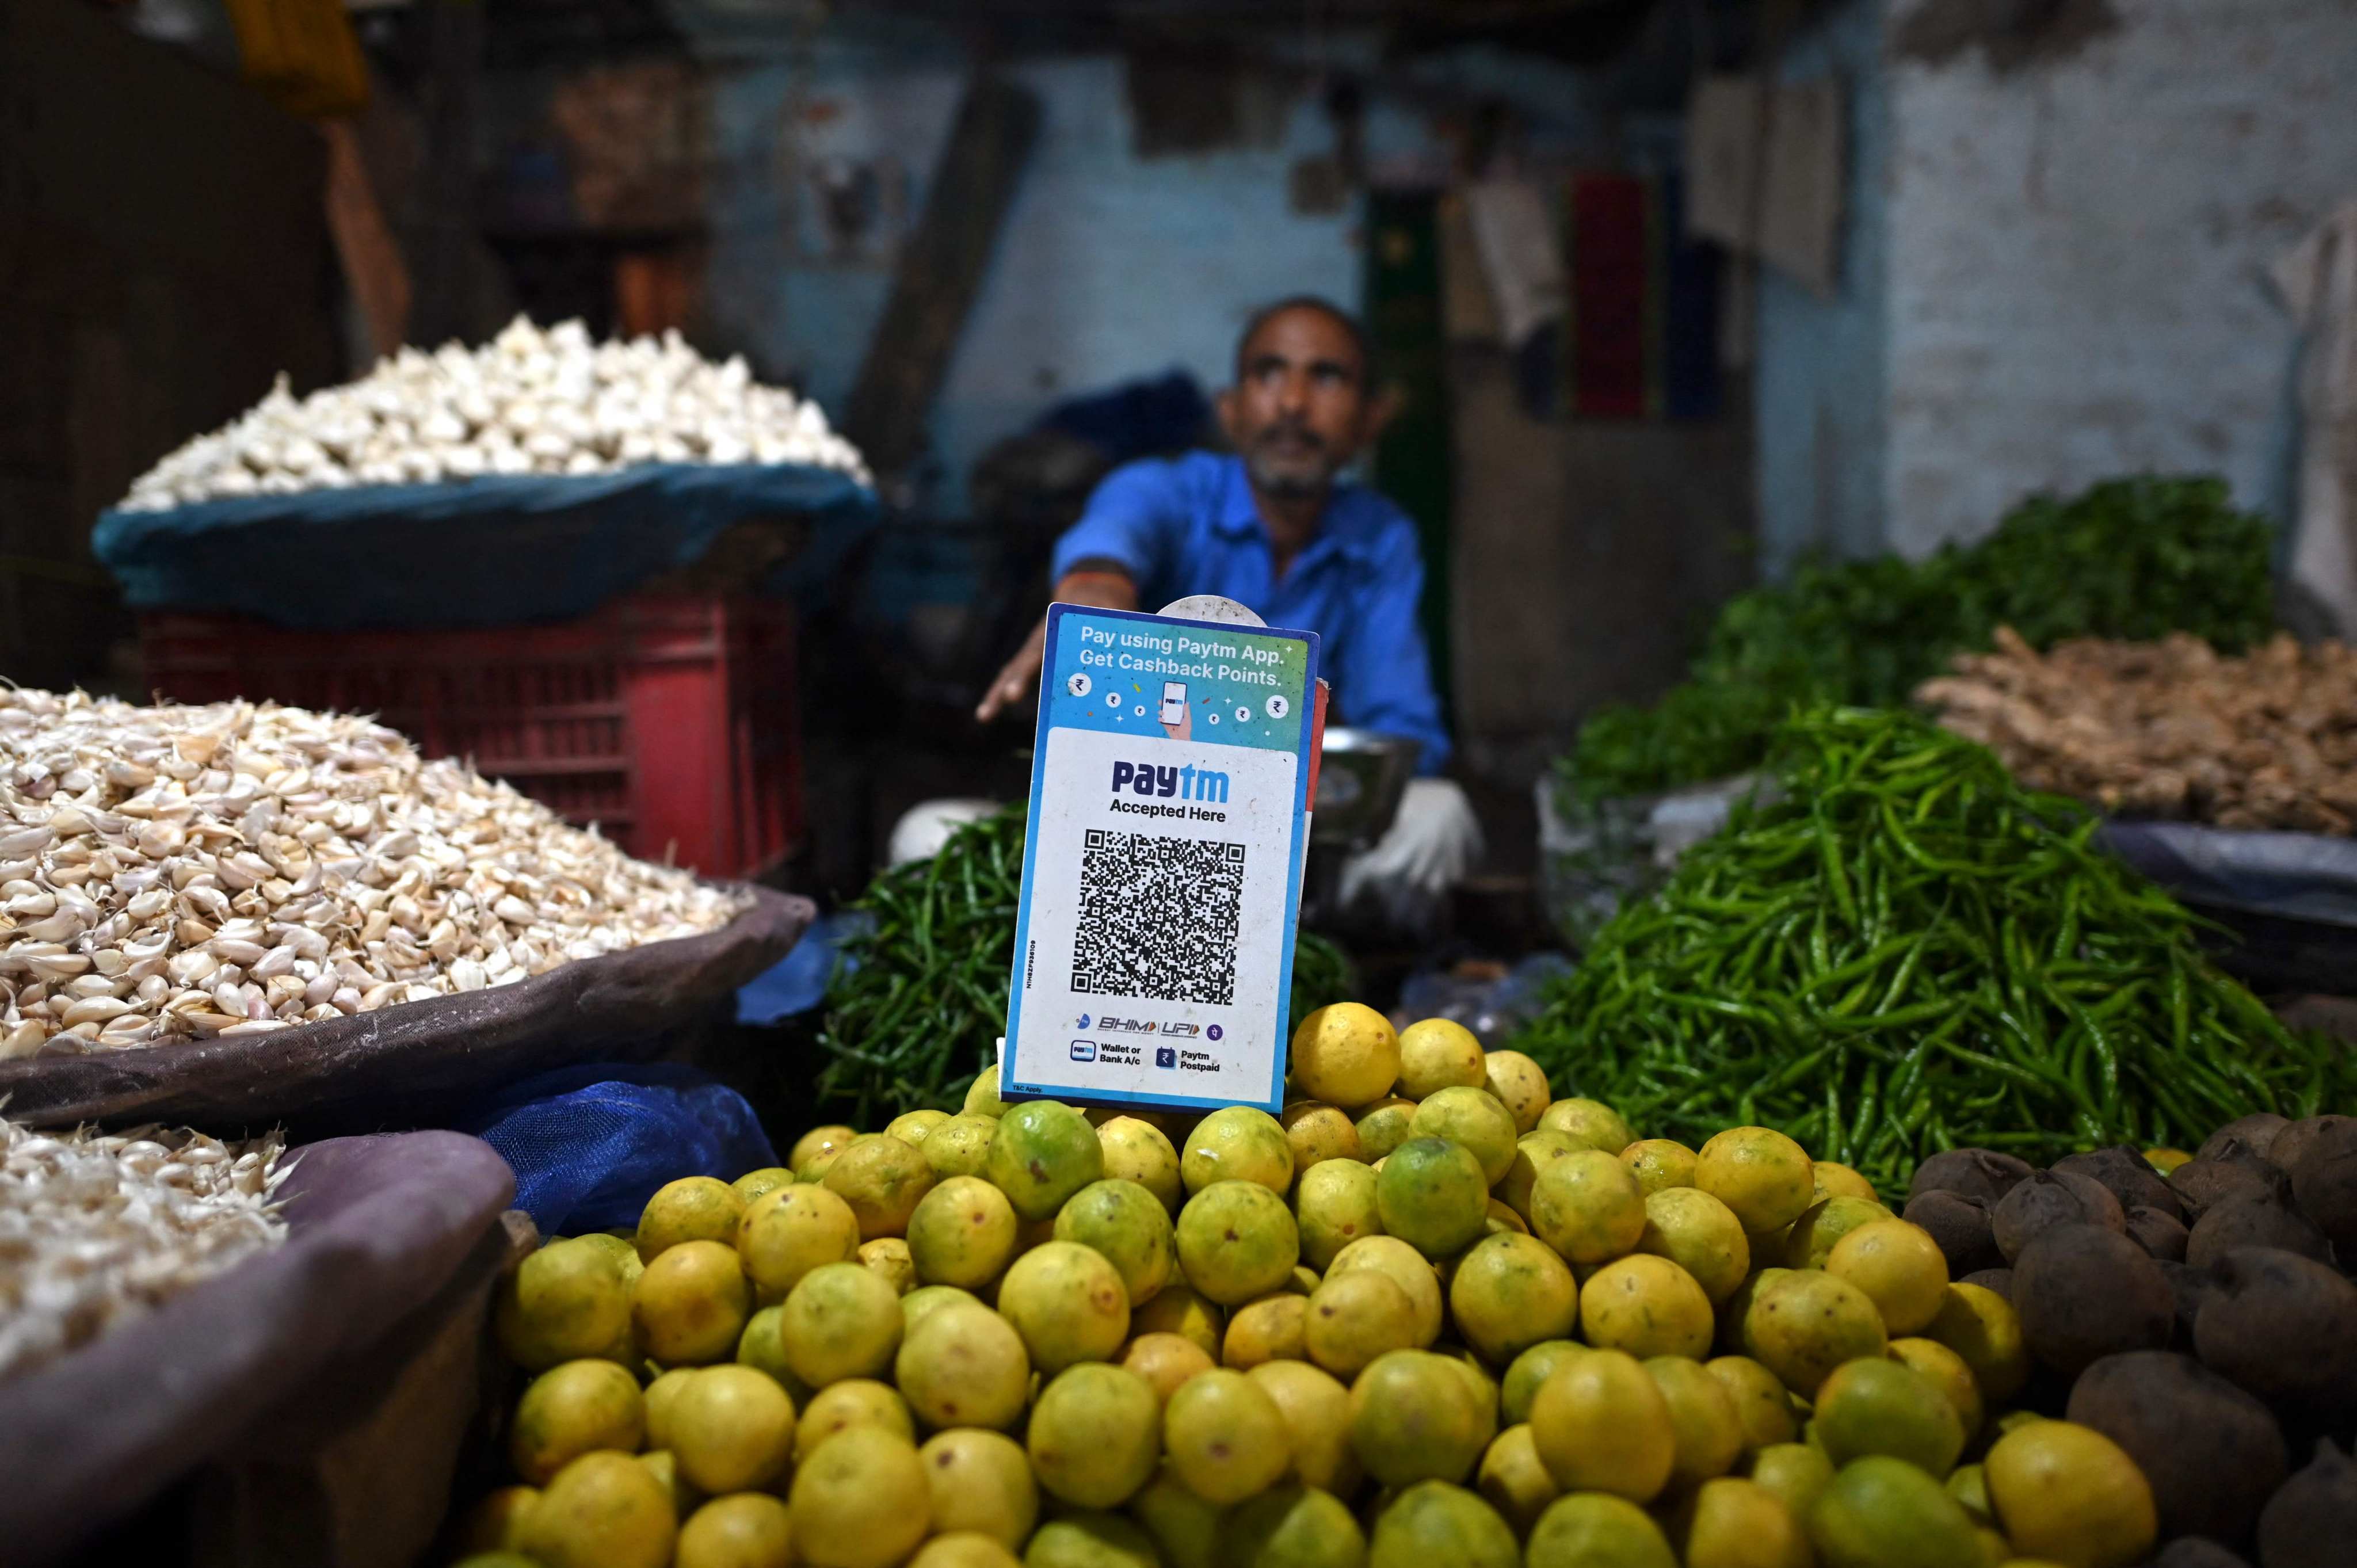 A vegetable vendor waits for customers displaying a barcode for digital payment company Paytm at a market in New Delhi. Photo: AFP